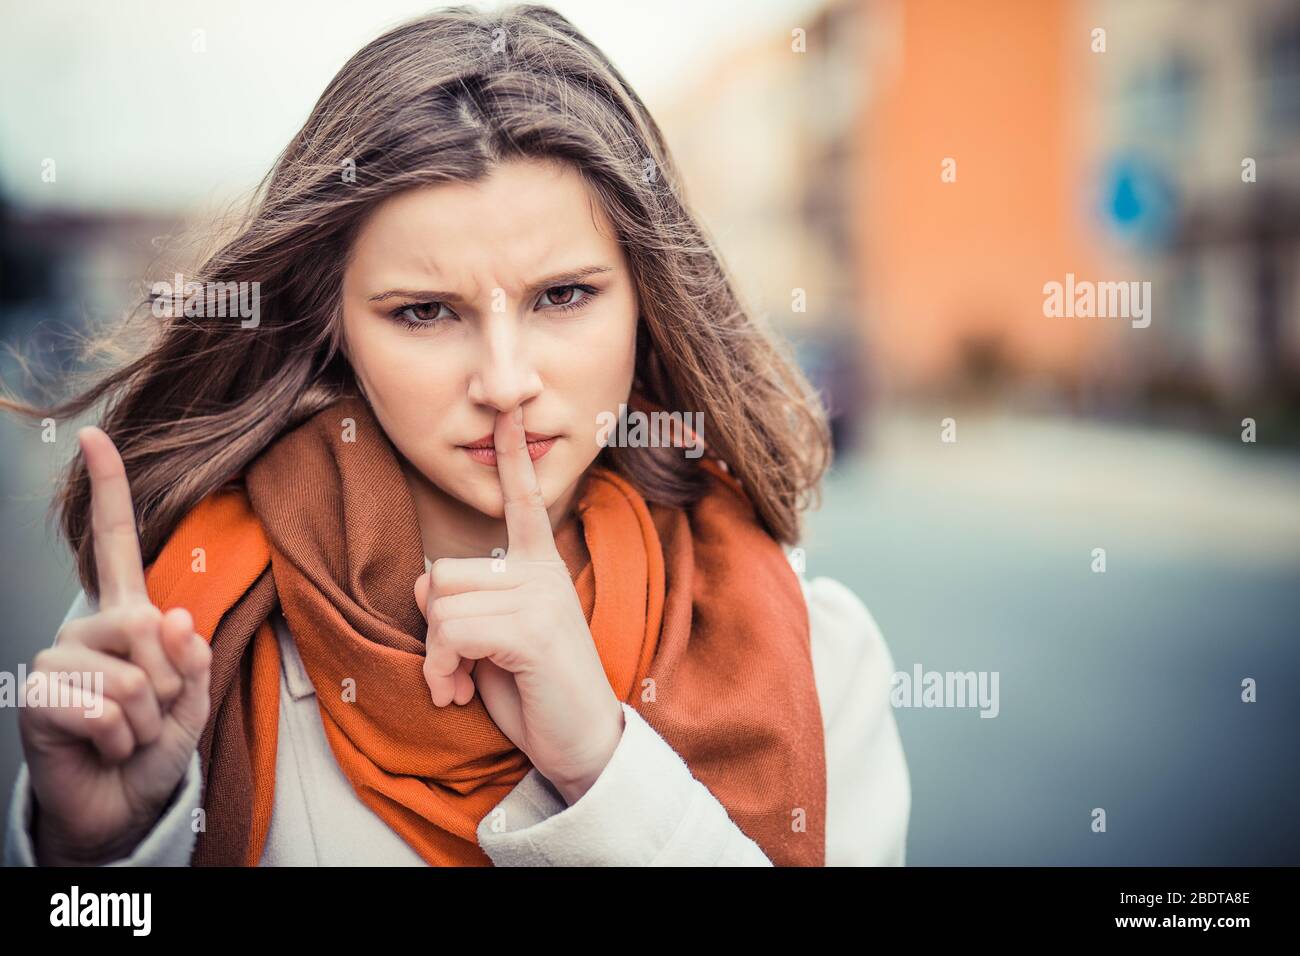 Woman asking for silence or secrecy with finger on lips hush hand gesture and woman wagging her other finger city background wall.  Shhh sign symbol. Stock Photo